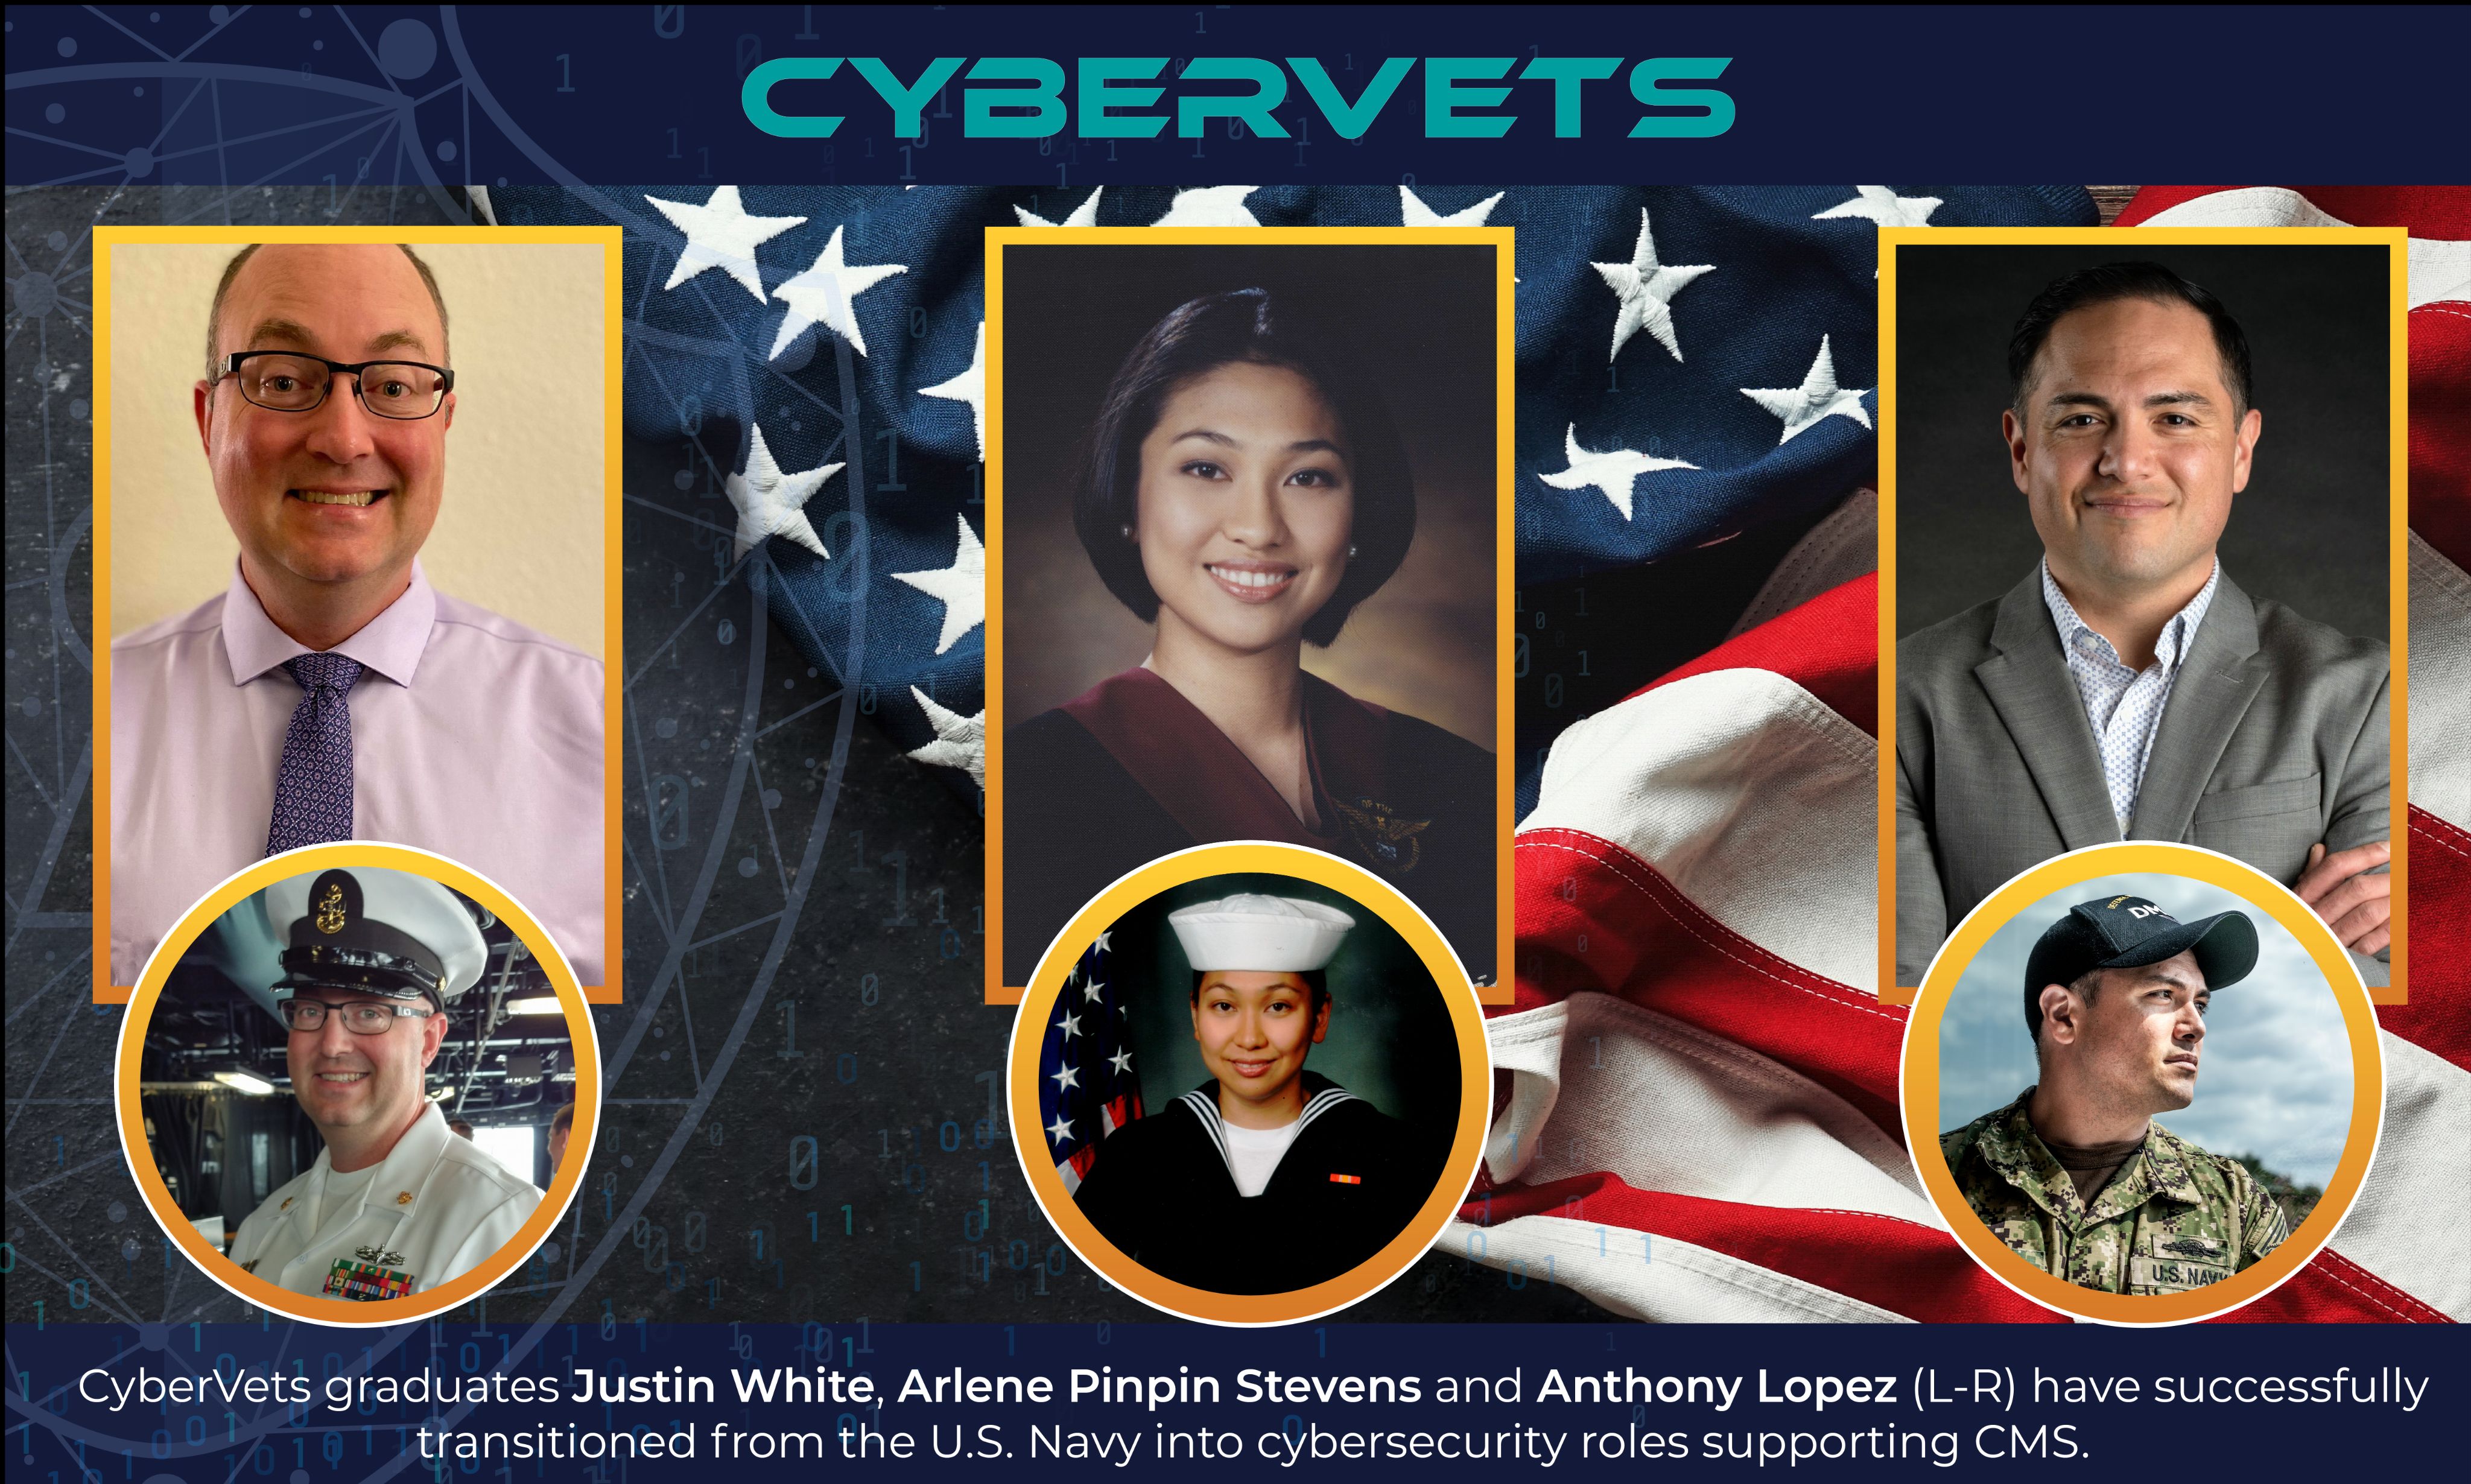 Photo of CyberVets graduates Justin White, Arlene Pinpin Stevens and Anthony Lopez, who have successfully transitioned from the U.S. Navy into cybersecurity roles supporting CMS.